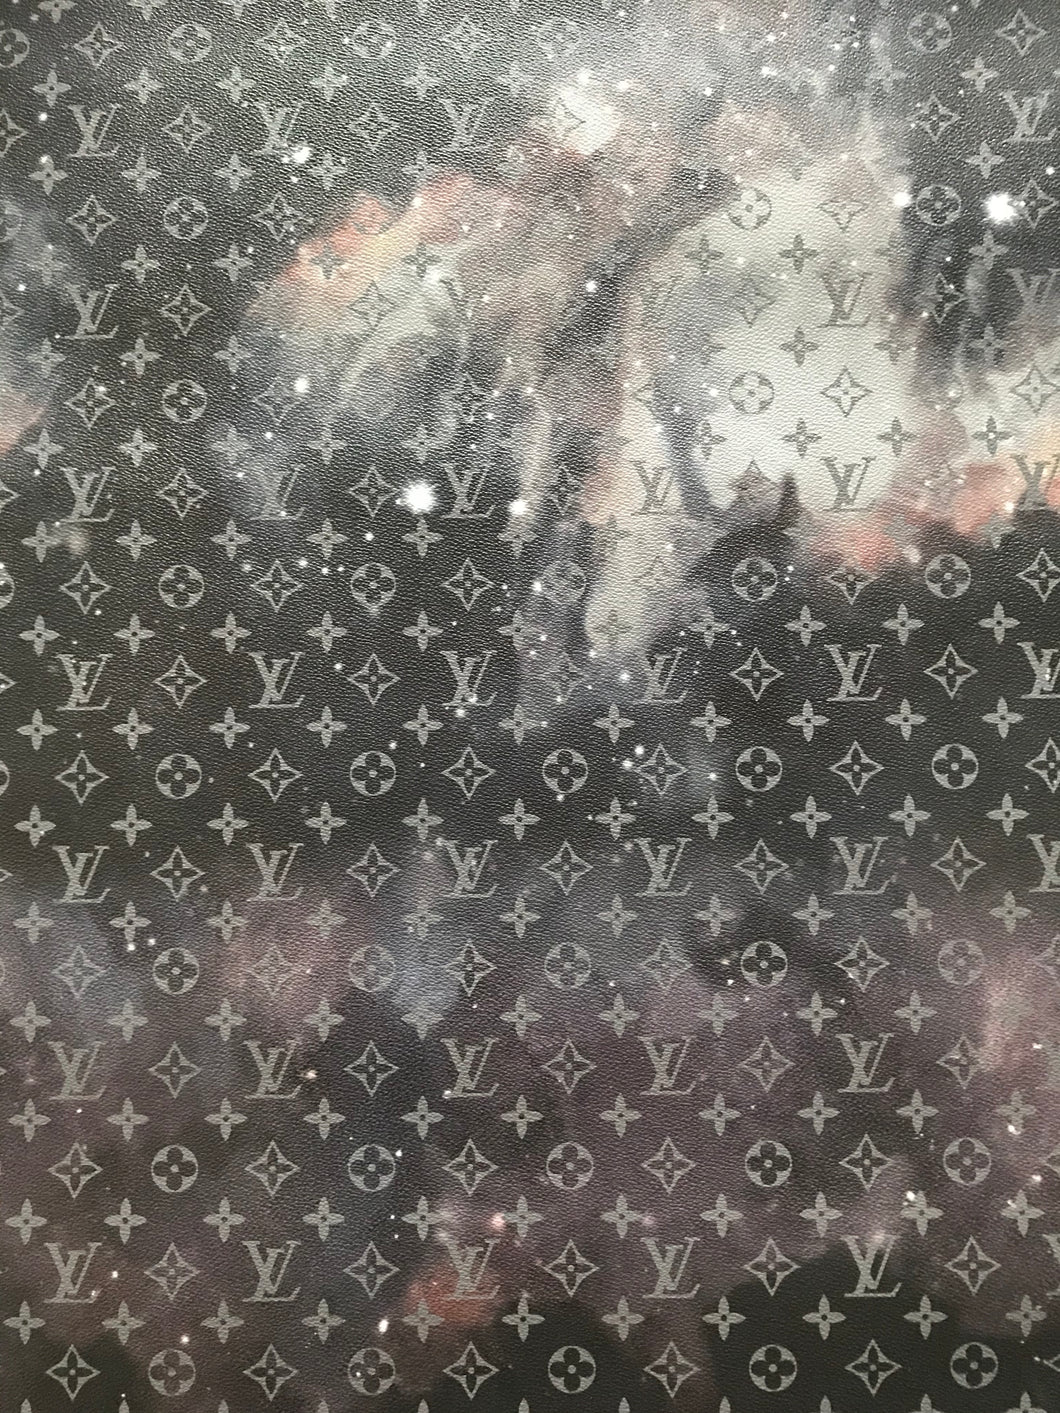 New Trending Galaxy LV Leather Fabric for Bag Shoe Customs